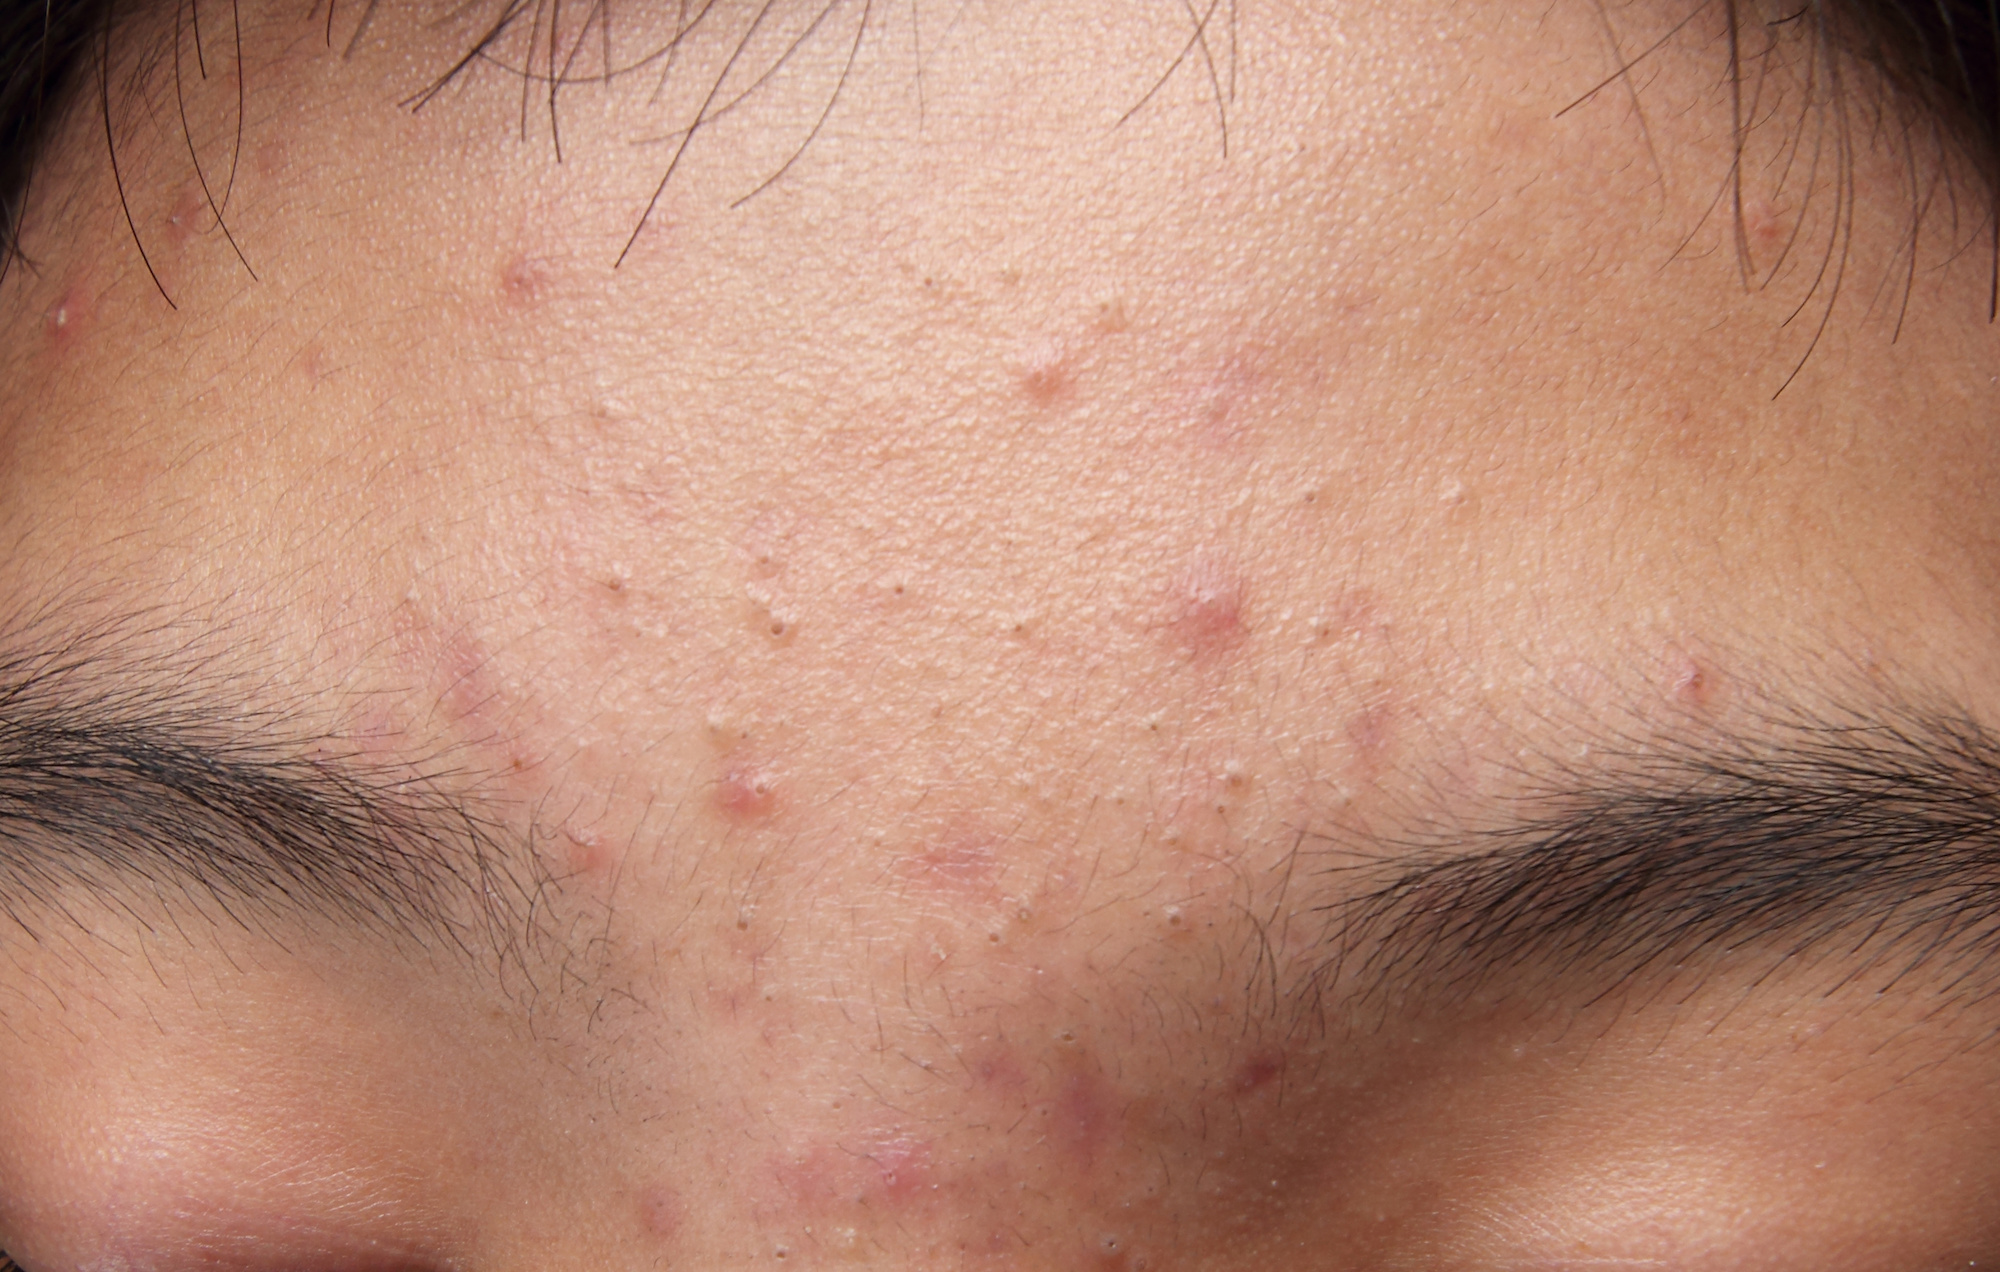 Benefits of Low Dose Accutane Therapy